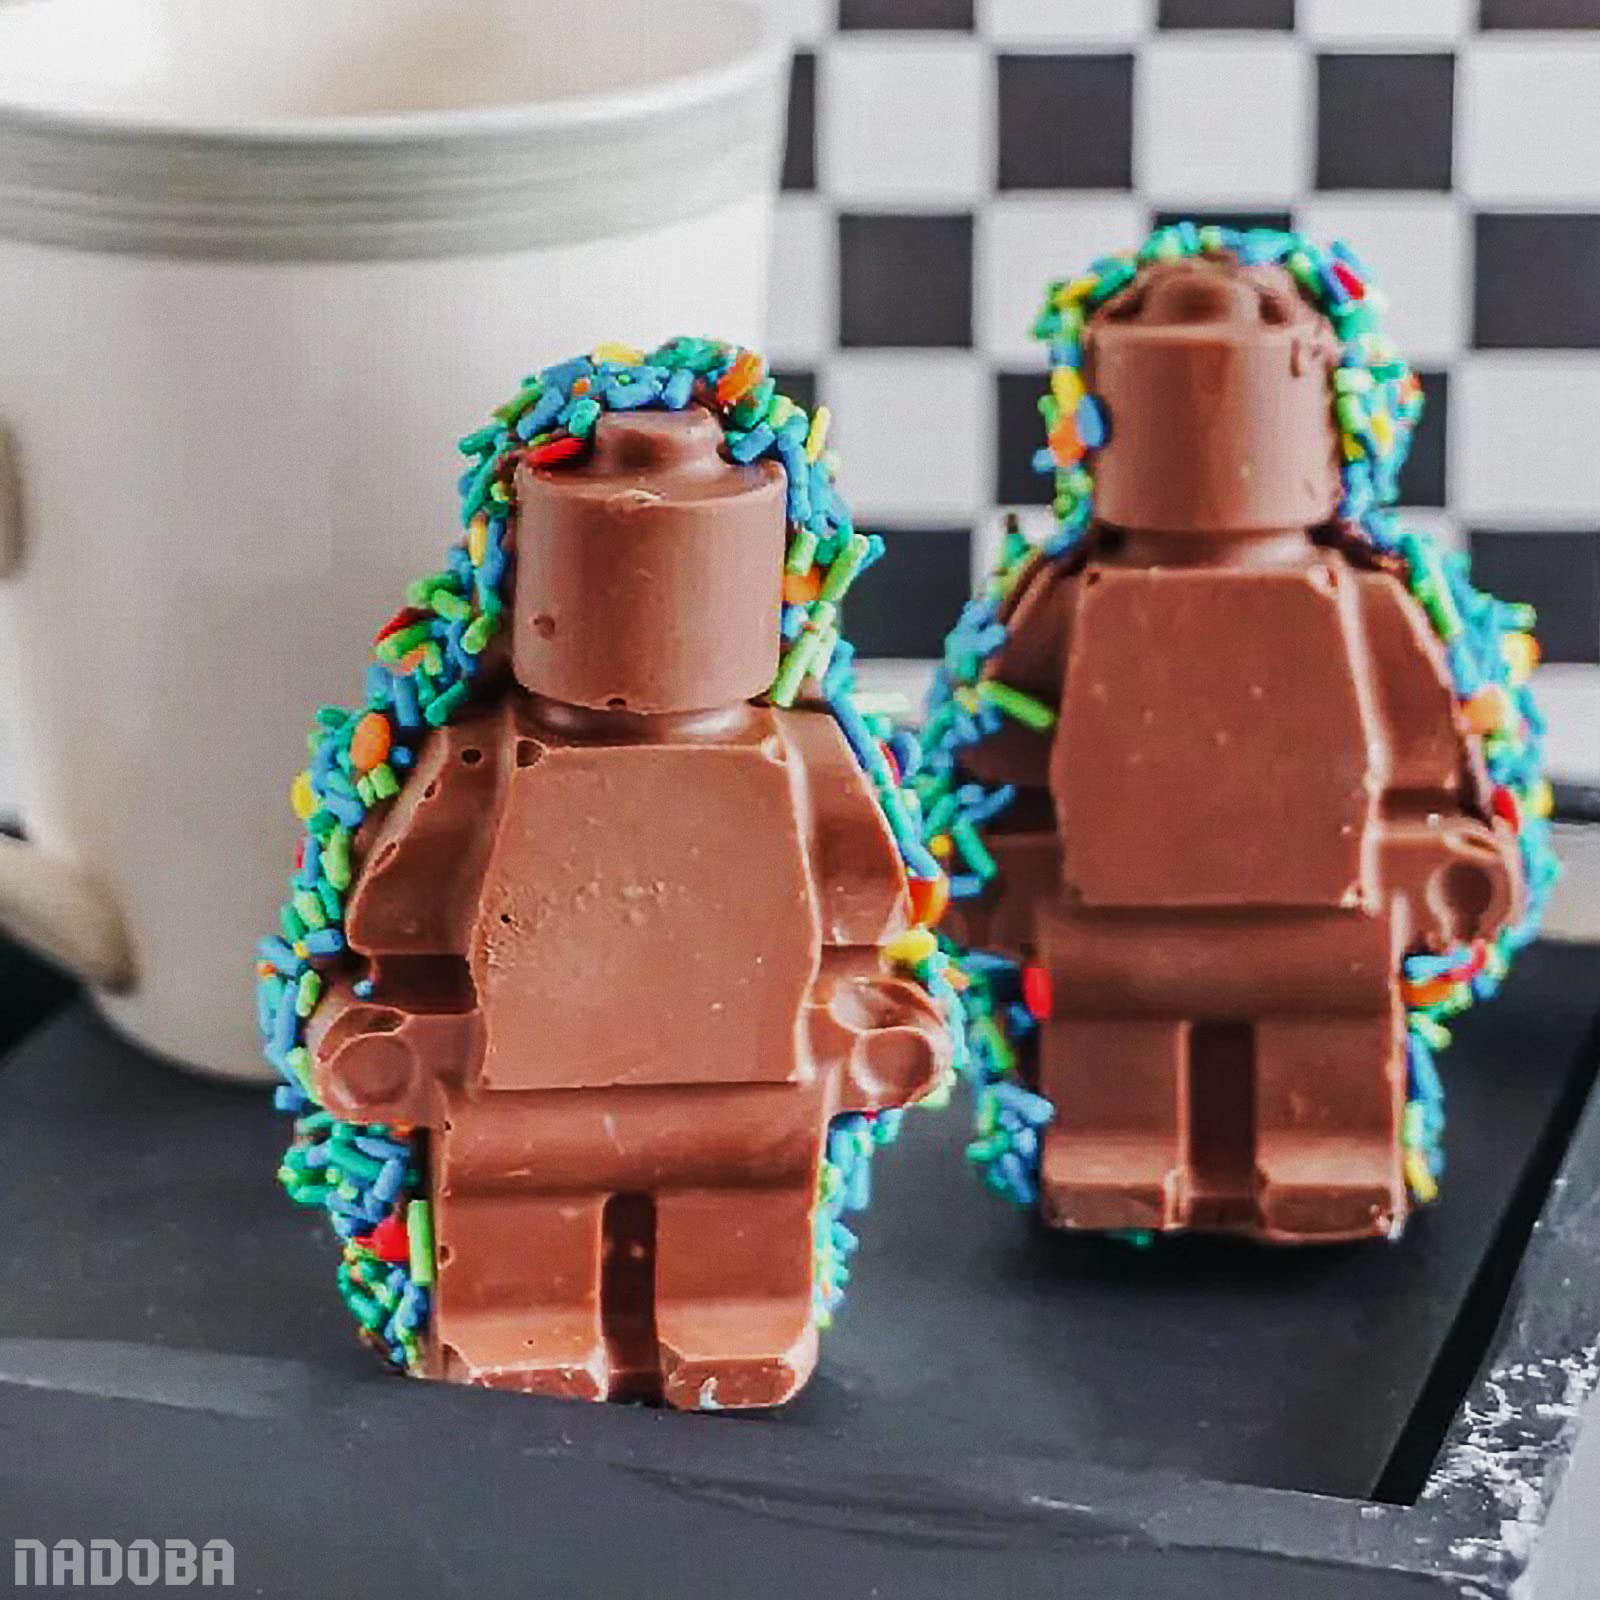 Building Brick Candy Robot Mold Chocolate Mold Set Silicone Building Block Mold Ice Cube Trays for Making Melted Chocolate Fondant Jelly Dome Mousse（6 Pcs)